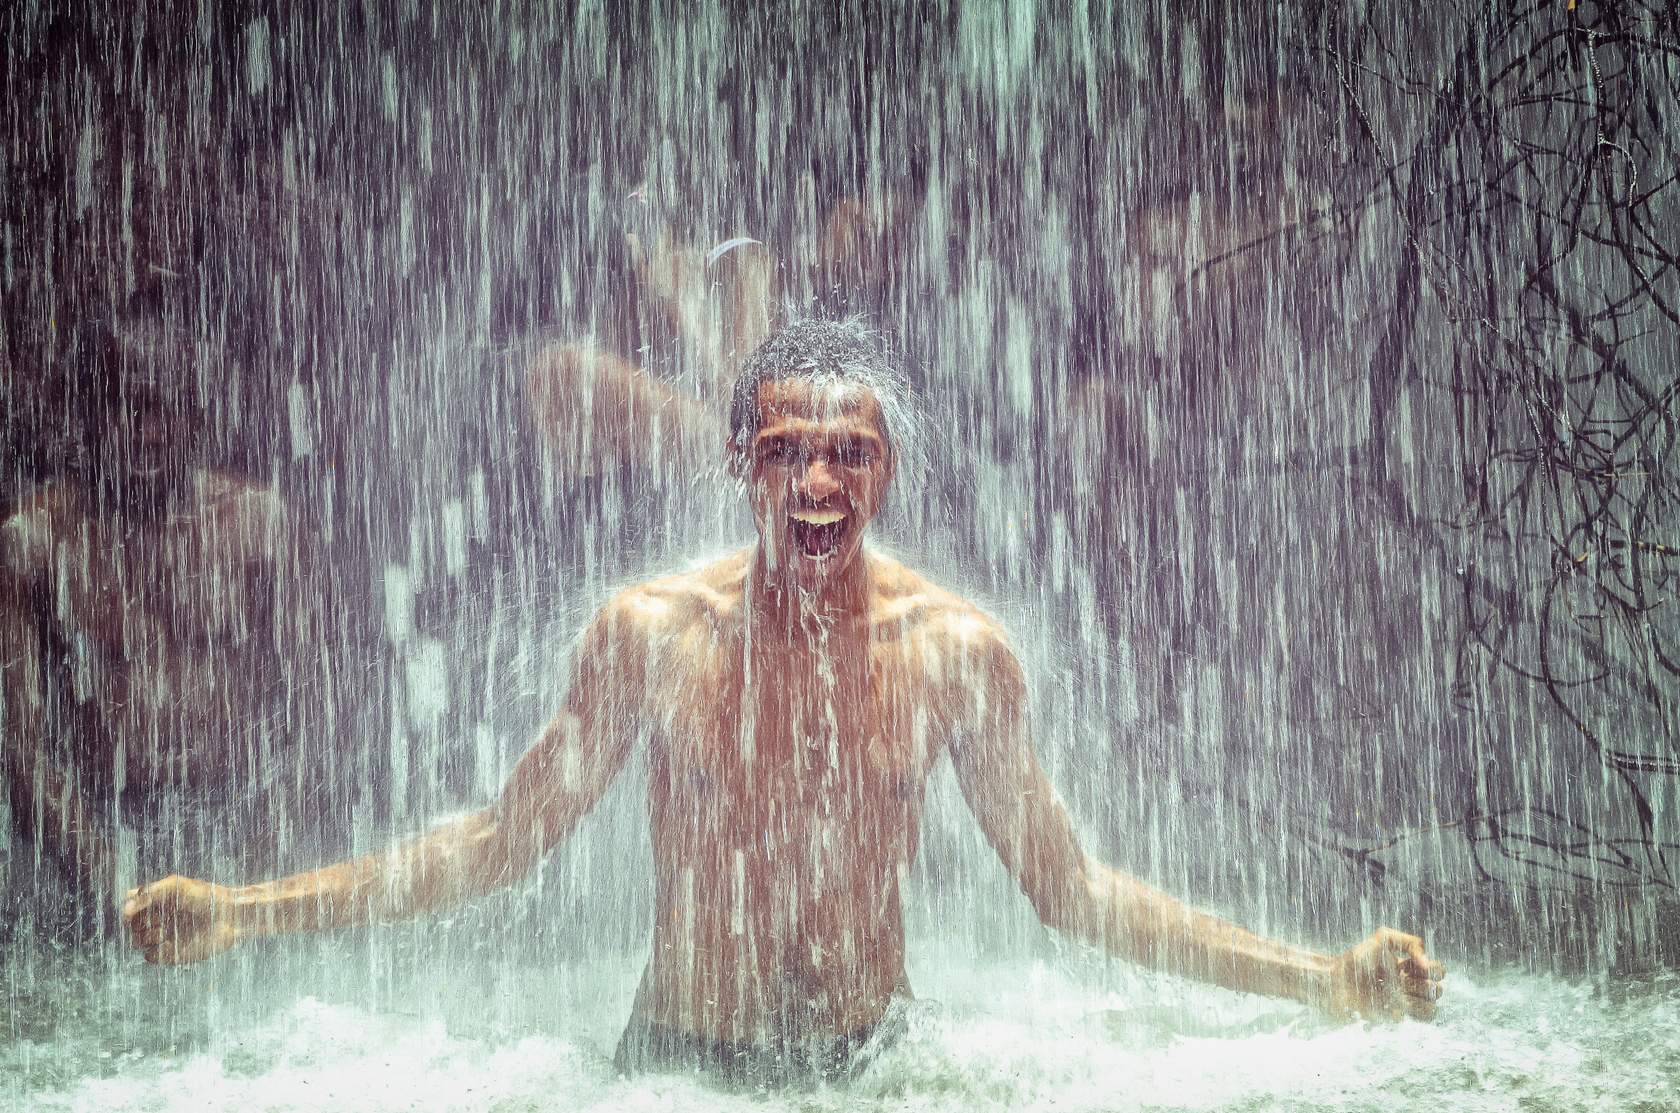 A man is standing under a waterfall with his arms open, showcasing the product.